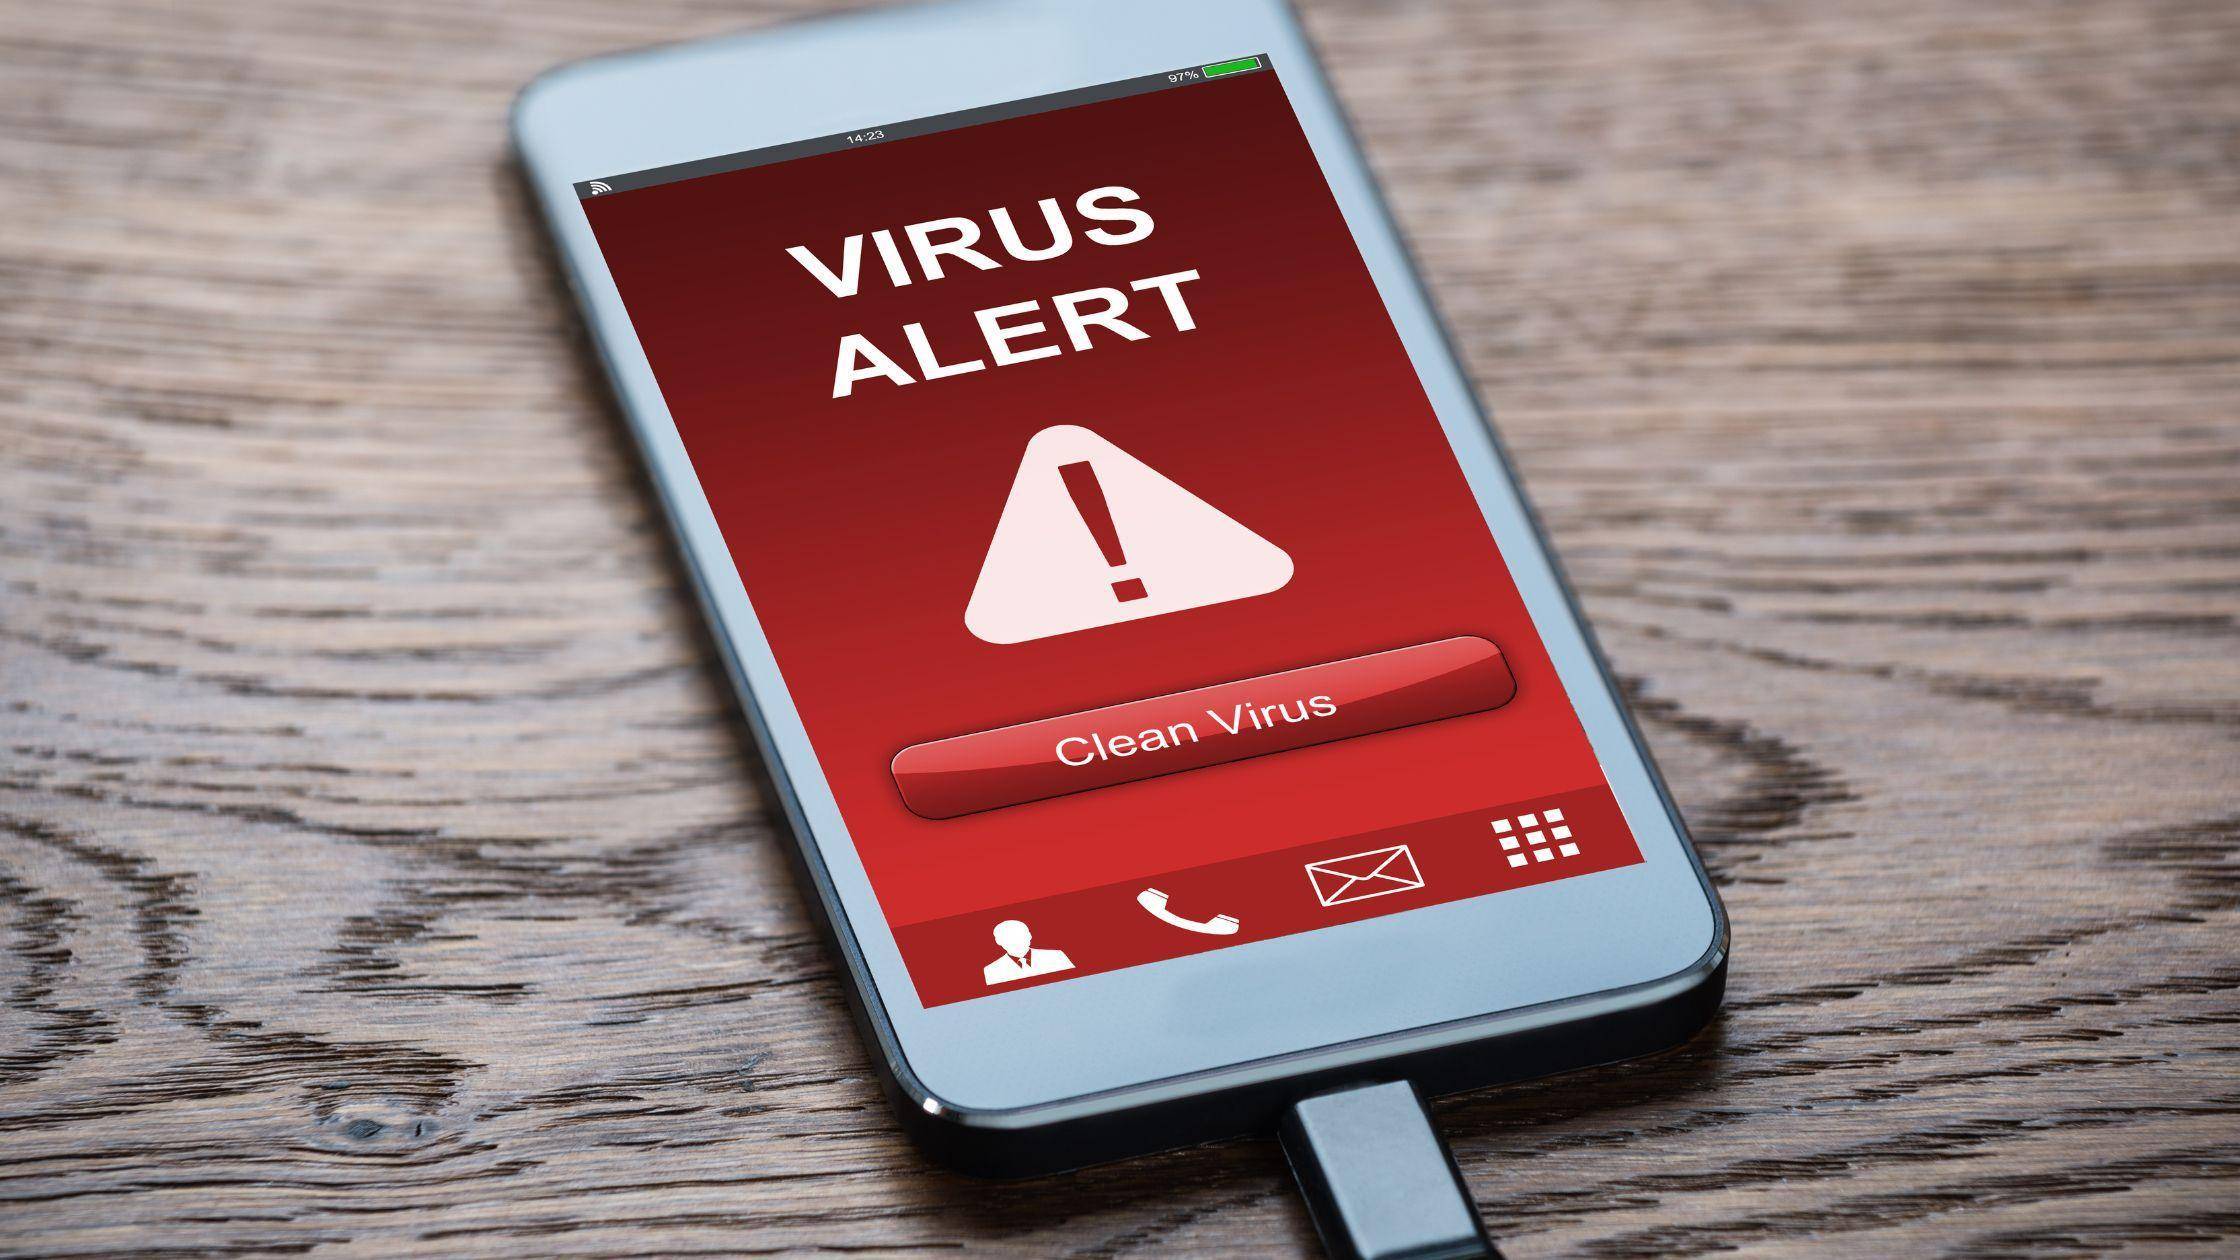 Malware Attack – Common ways an Android phone can get infected.